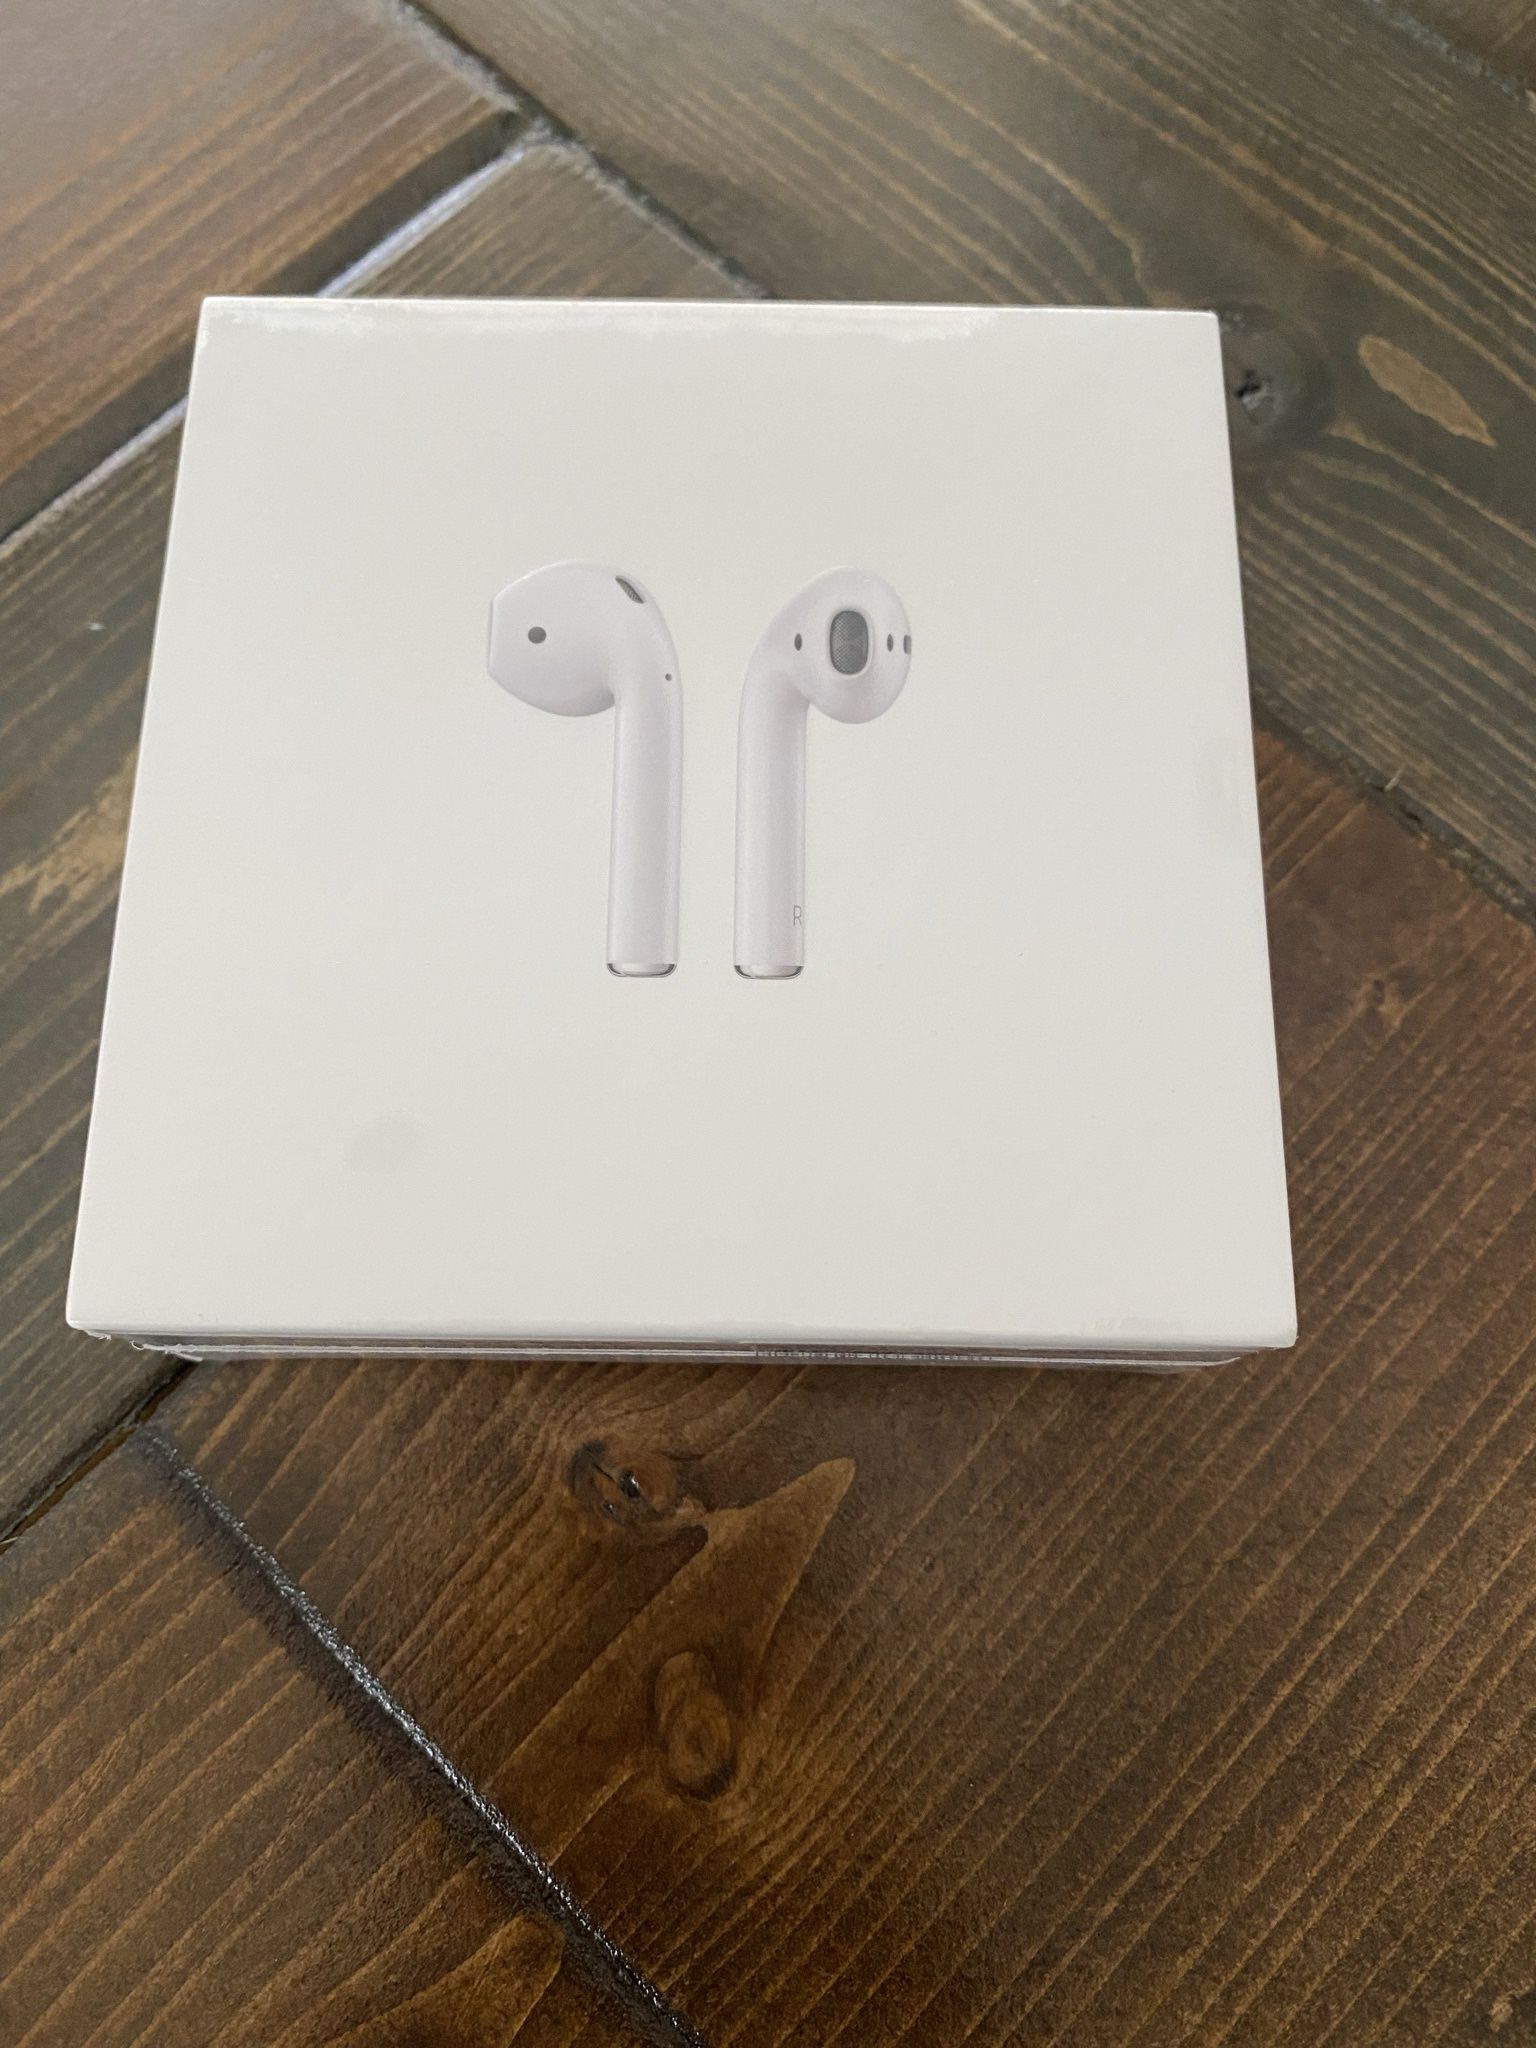 ⚡️🔥New AirPods With Charging Case. Factory Sealed